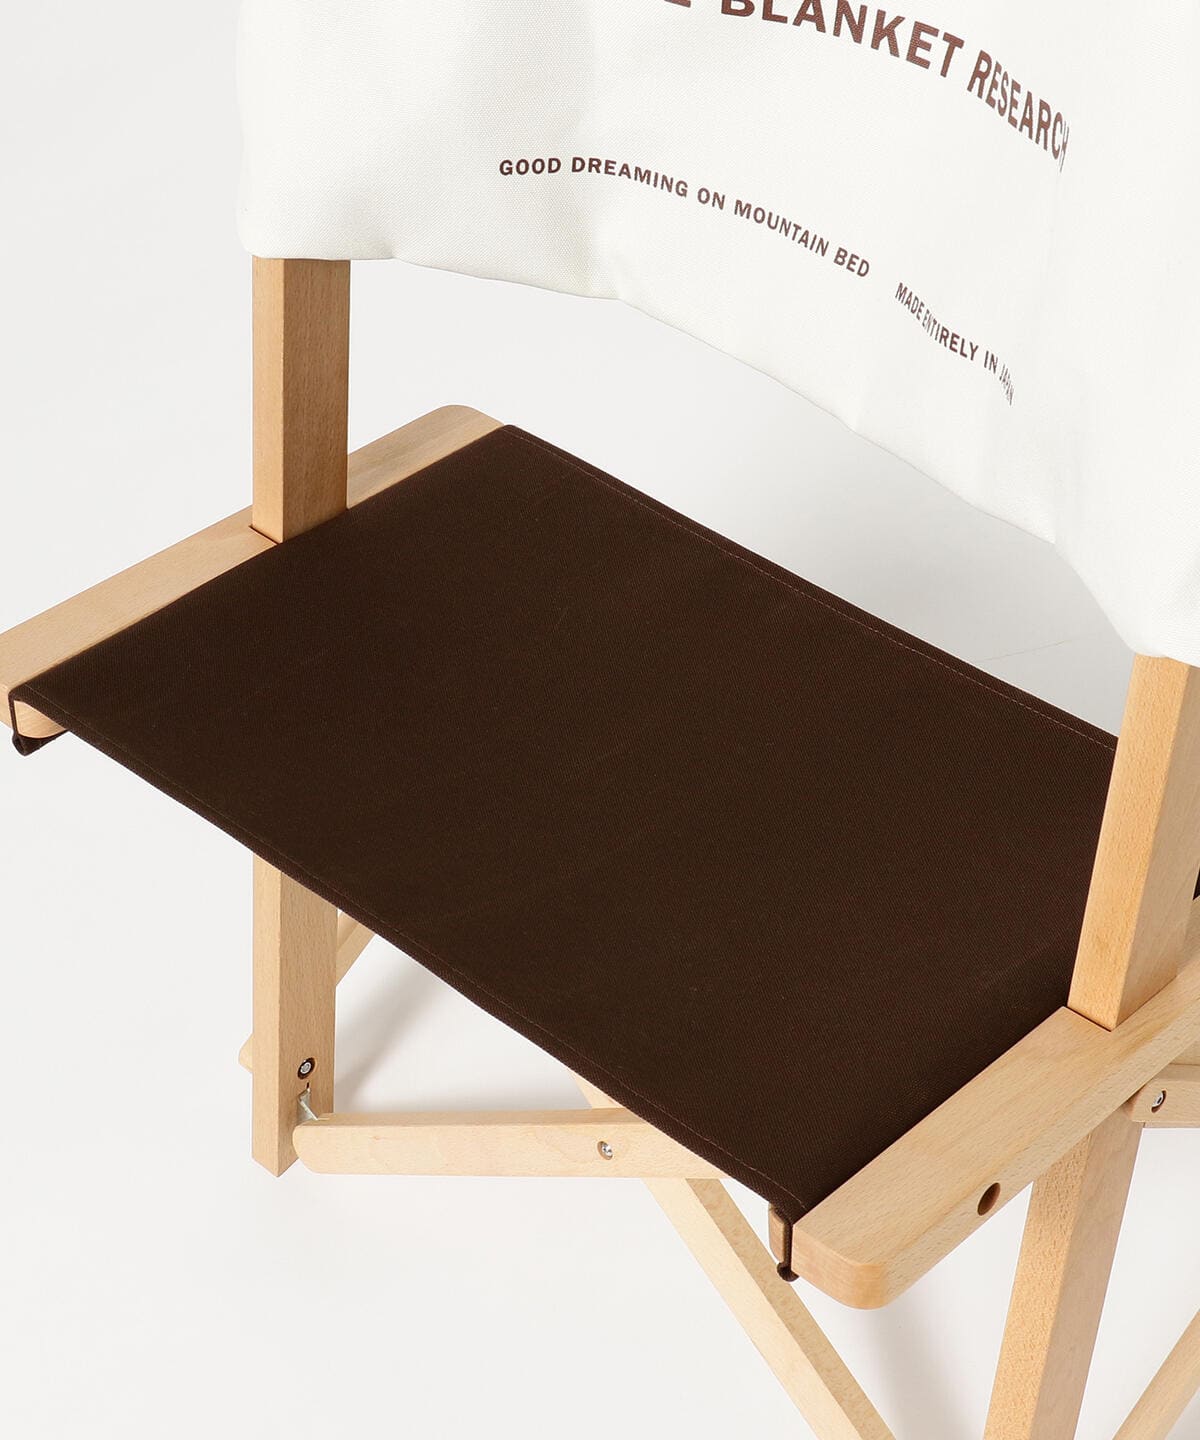 BEAMS PLUS（ビームス プラス）HORSE BLANKET RESEARCH / Folding